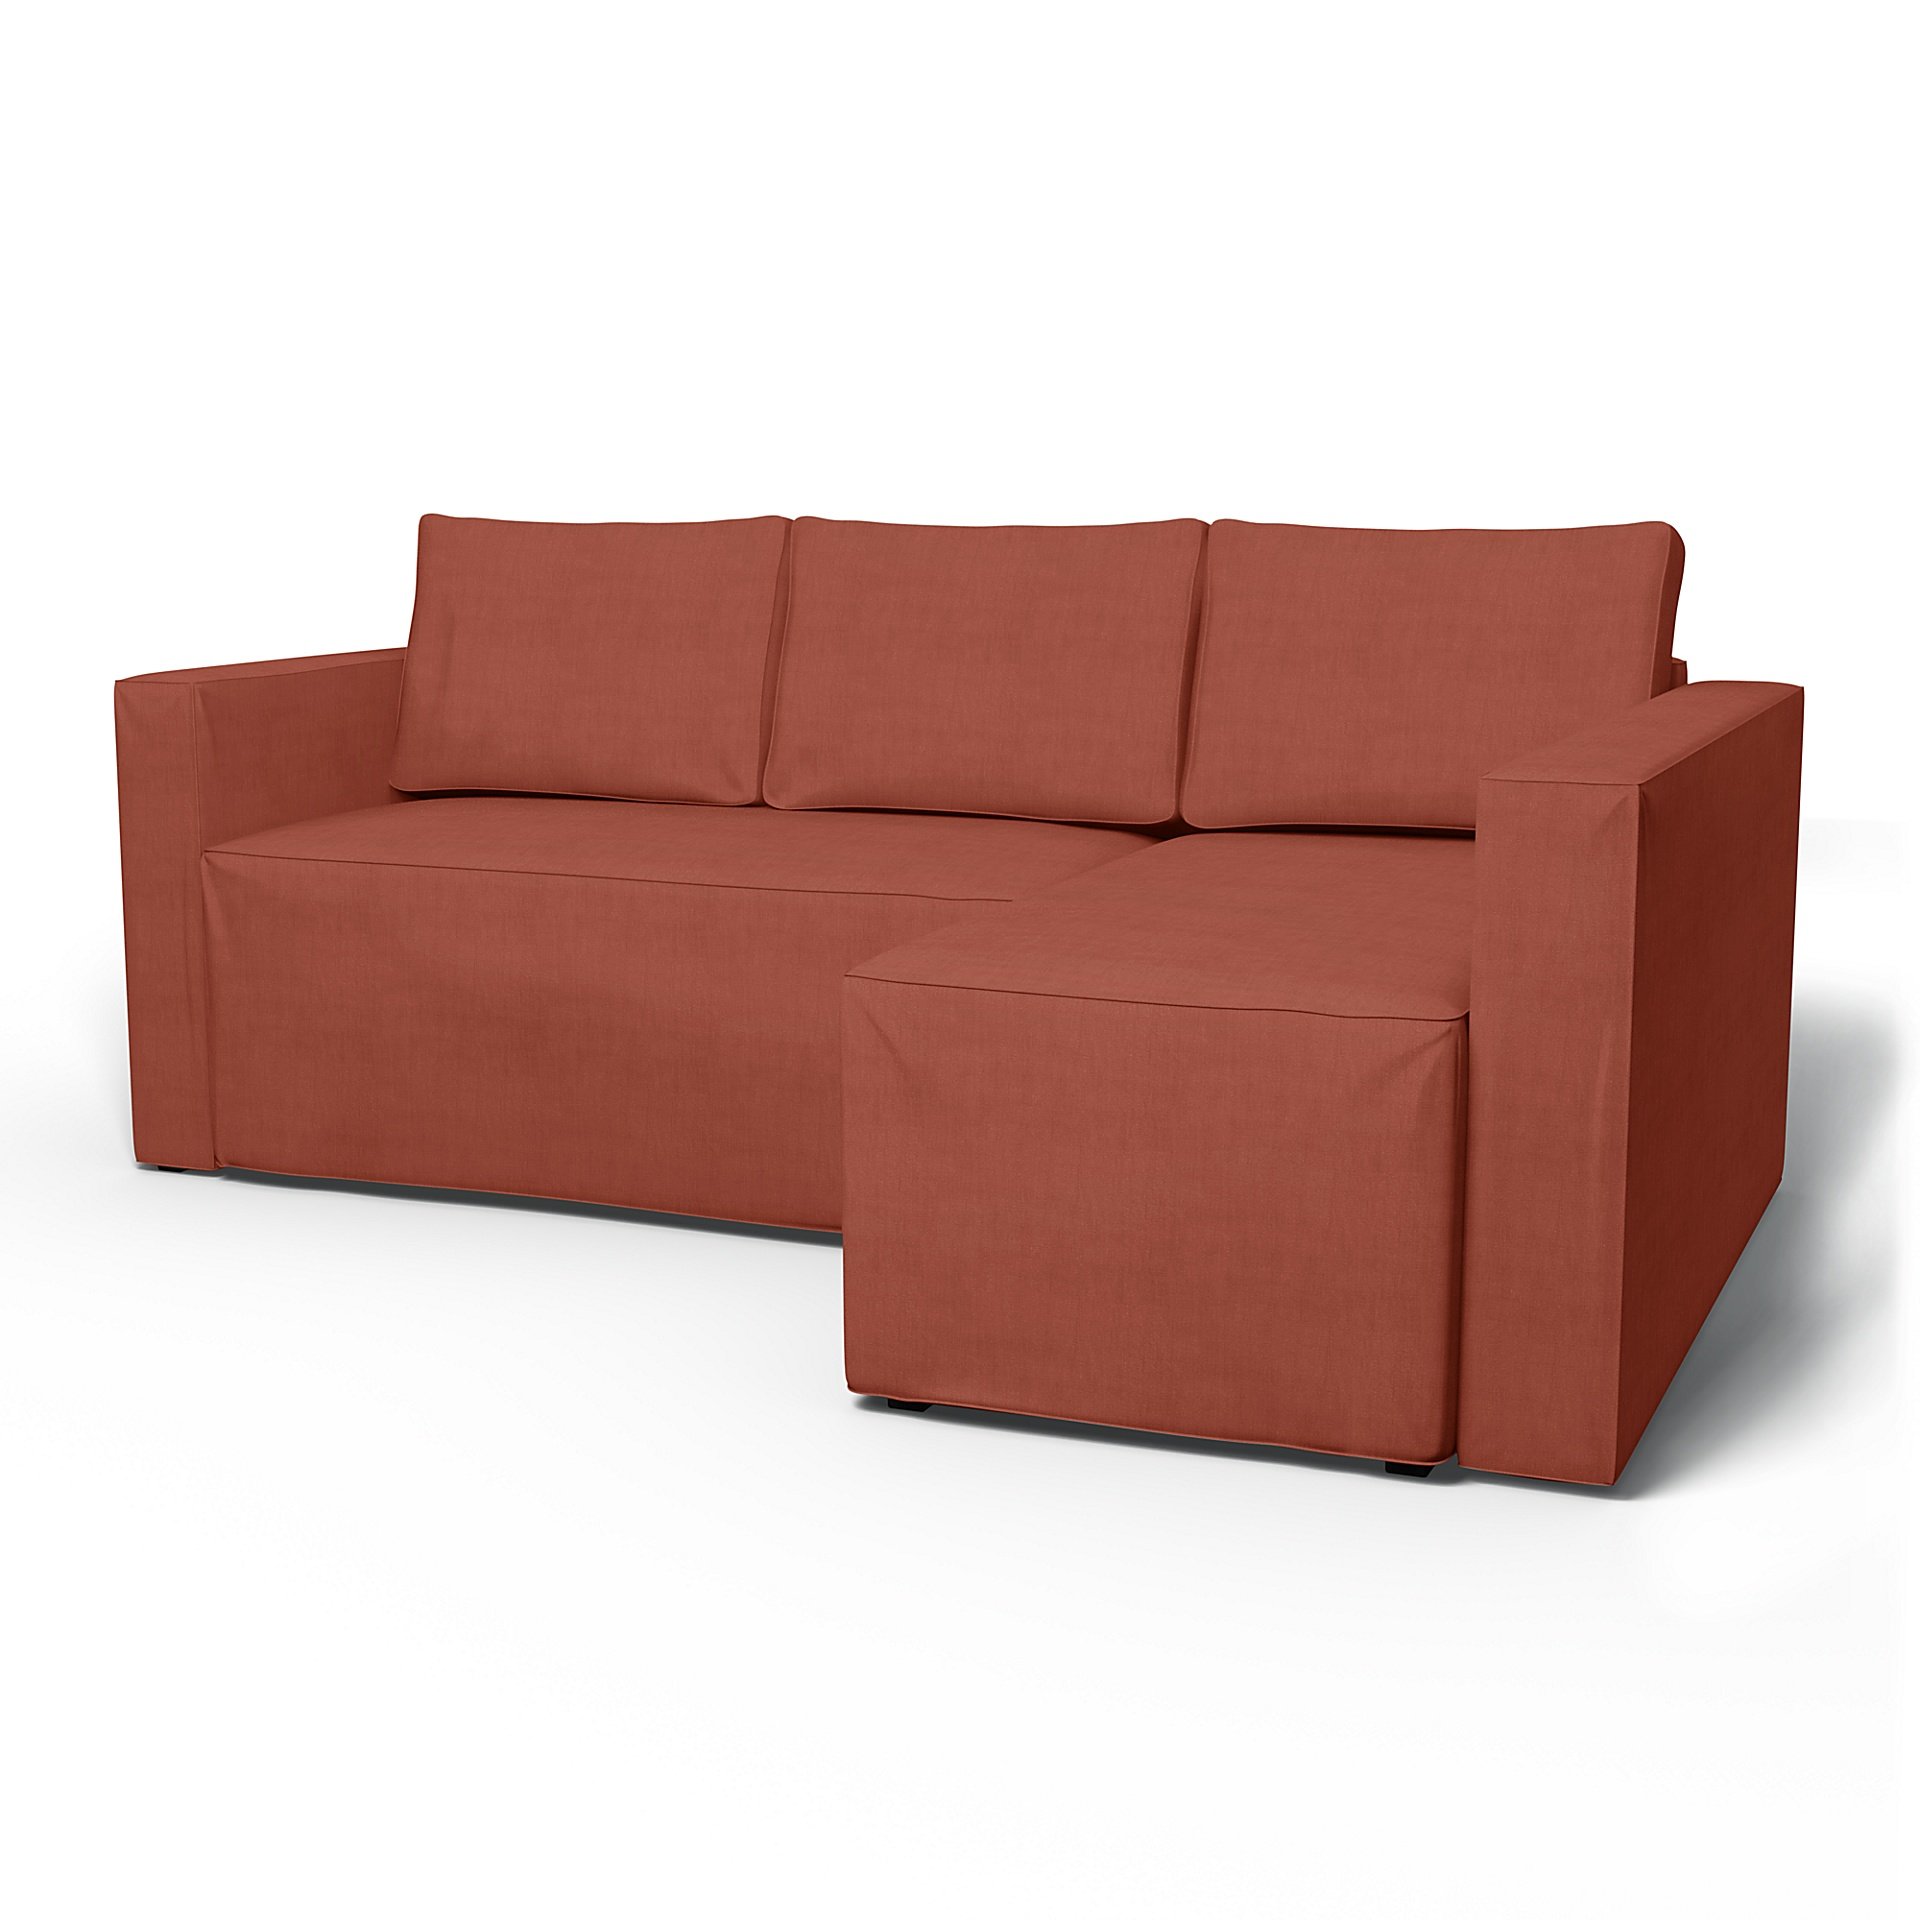 IKEA - Manstad Sofa Bed with Right Chaise Cover, Terracotta, Linen - Bemz